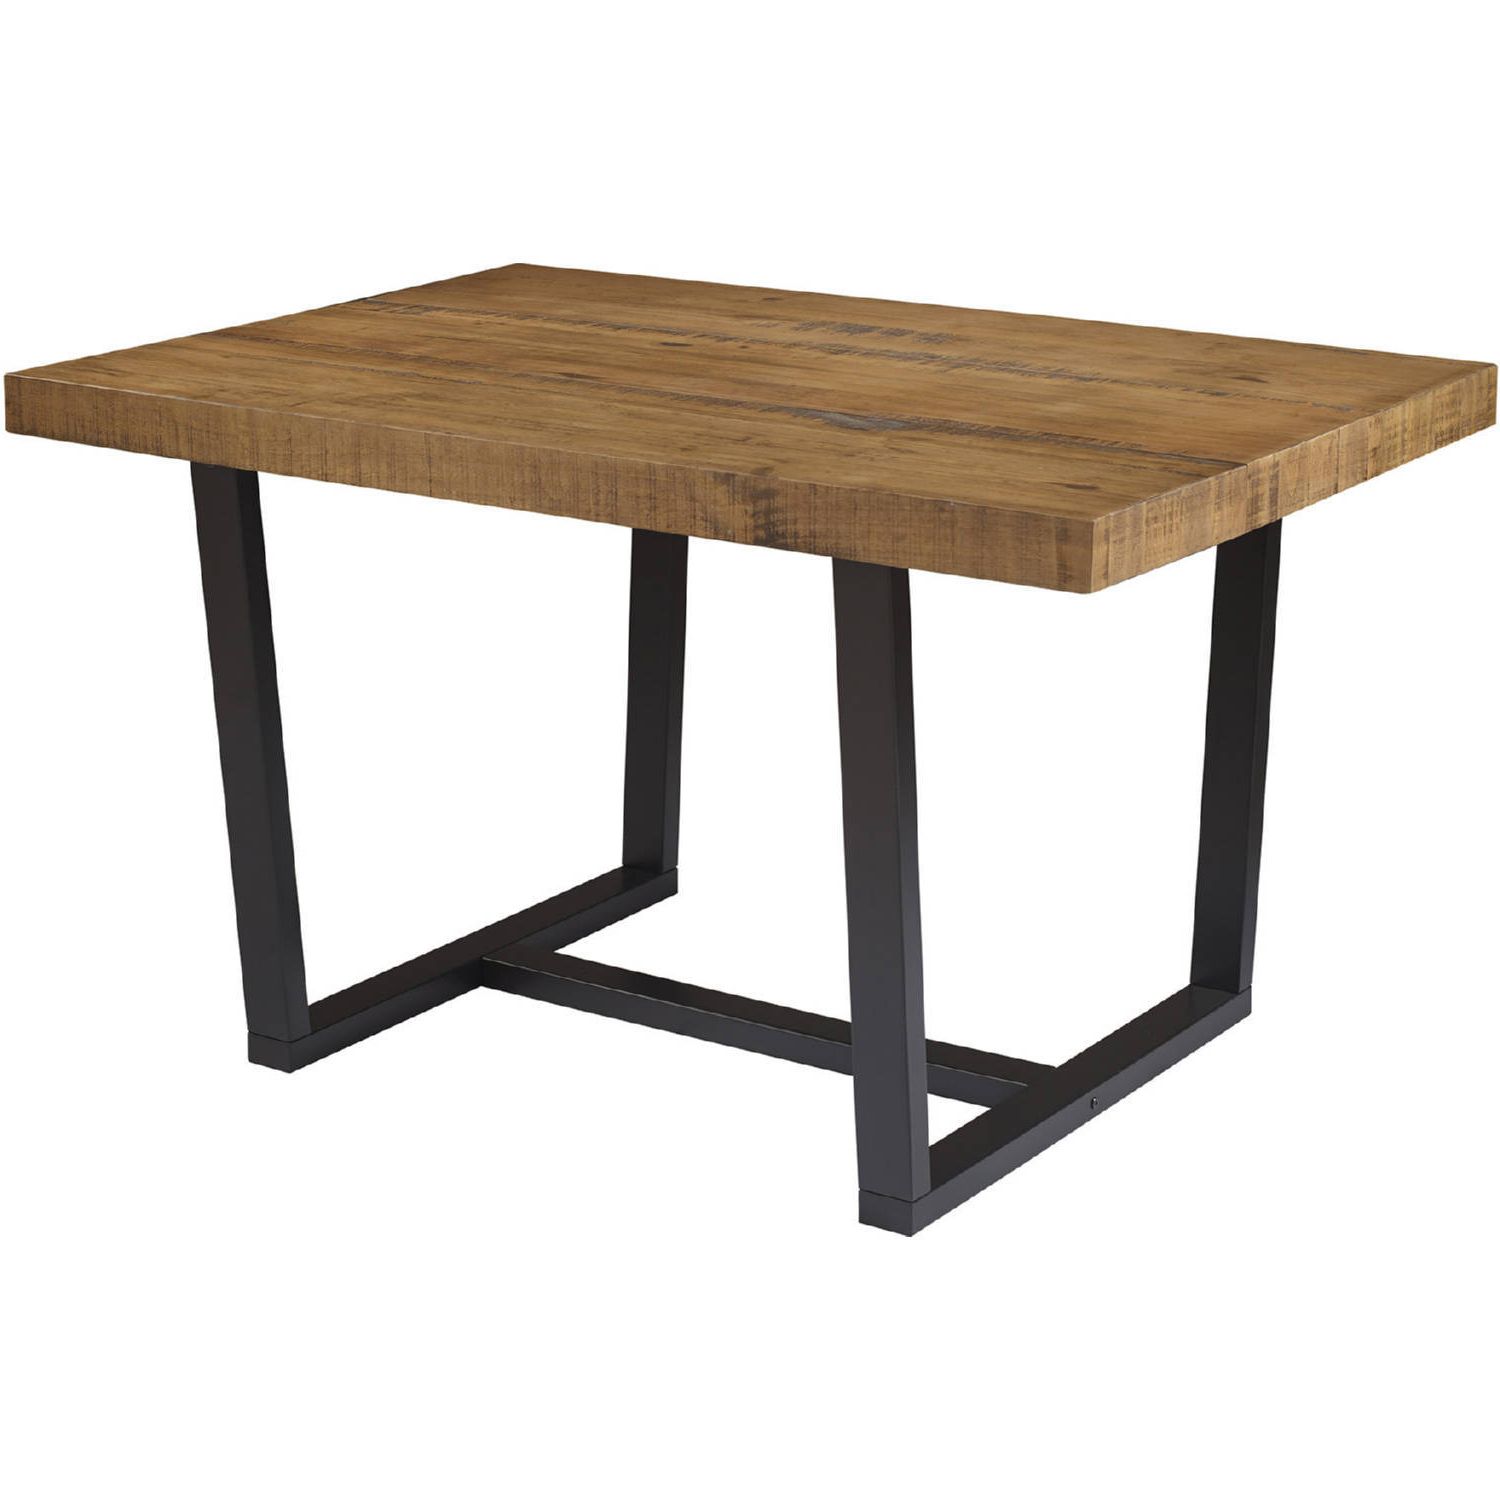 Most Popular Splendid Reclaimed Barn Wood Table Furniture Pretty Rustic Throughout Griffin Reclaimed Wood Dining Tables (View 9 of 25)